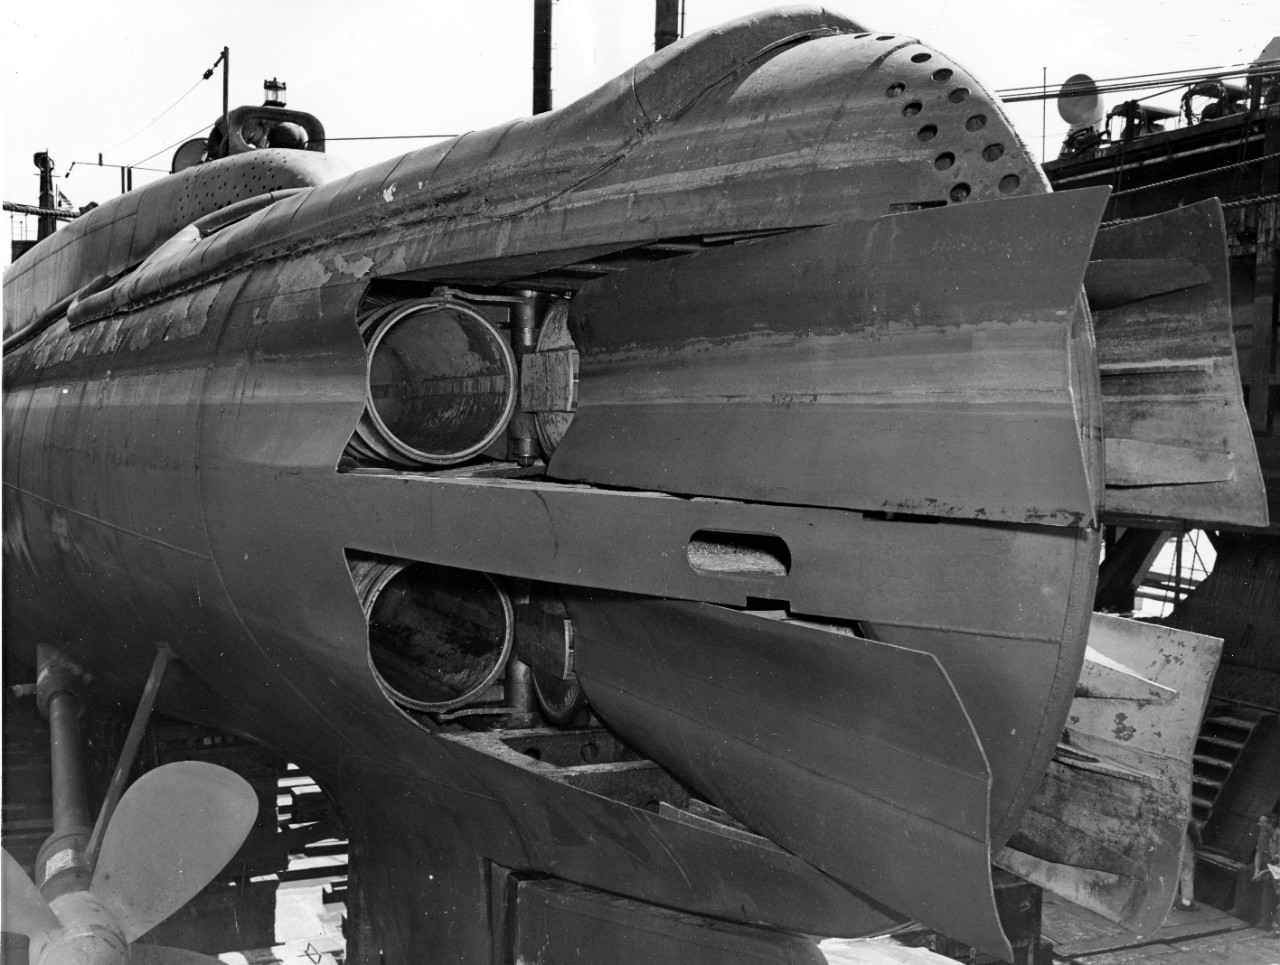 Tullibee’s port after torpedo tube shutters in the open position, Pearl Harbor Navy Yard, 24 May 1943. (U.S. Navy Bureau of Ships Photograph, 19-LCM Box 540, National Archives and Records Administration, Still Pictures Division, College Park, Md.)